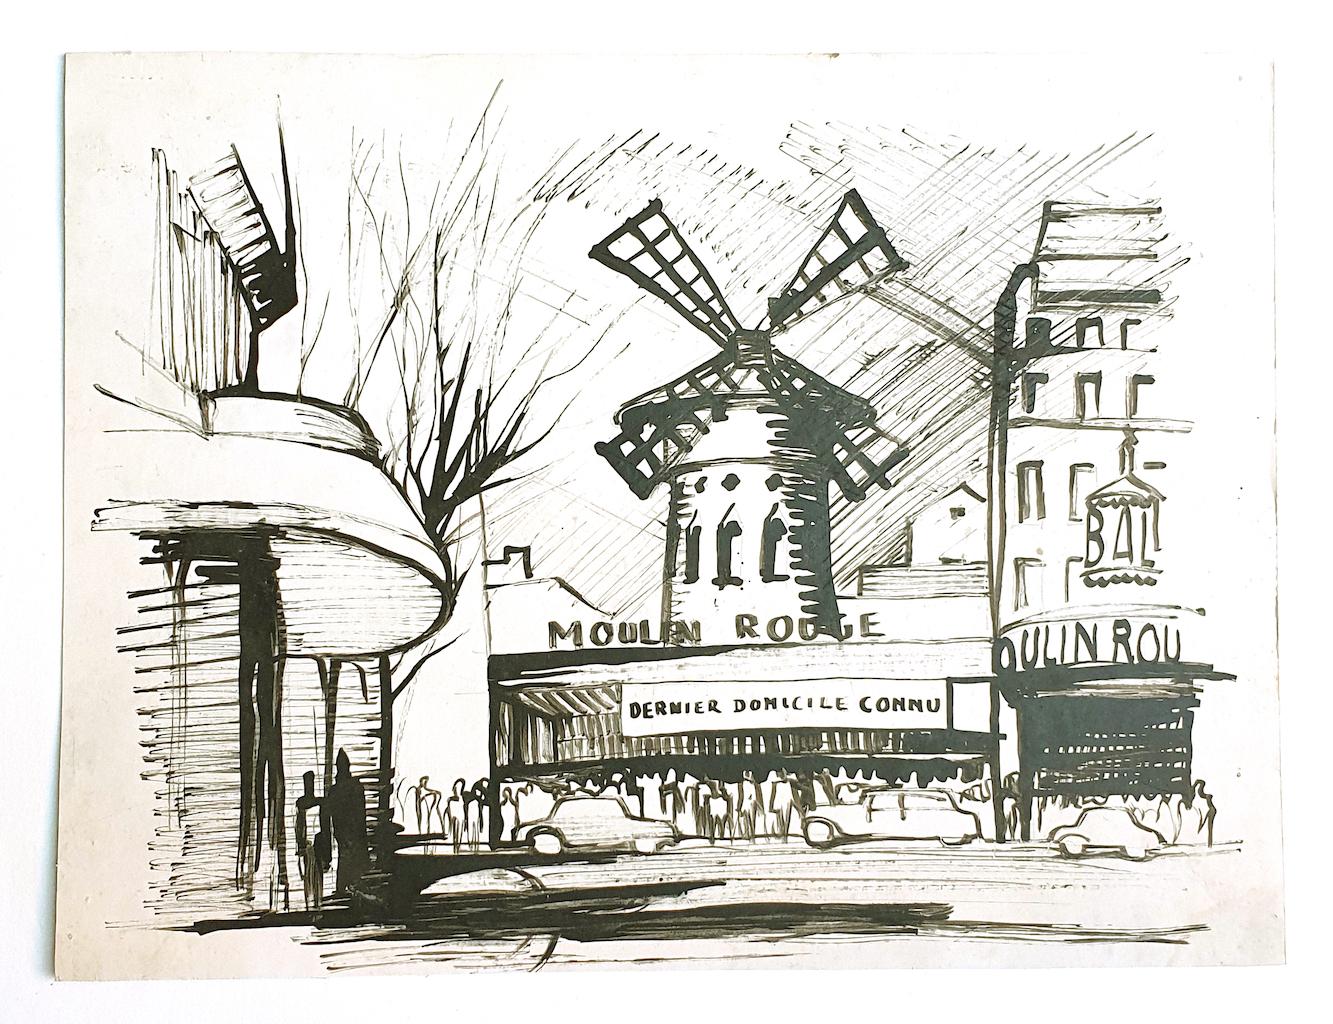 Unknown Figurative Art - Moulin Rouge - China Ink on Paper - 20th Century